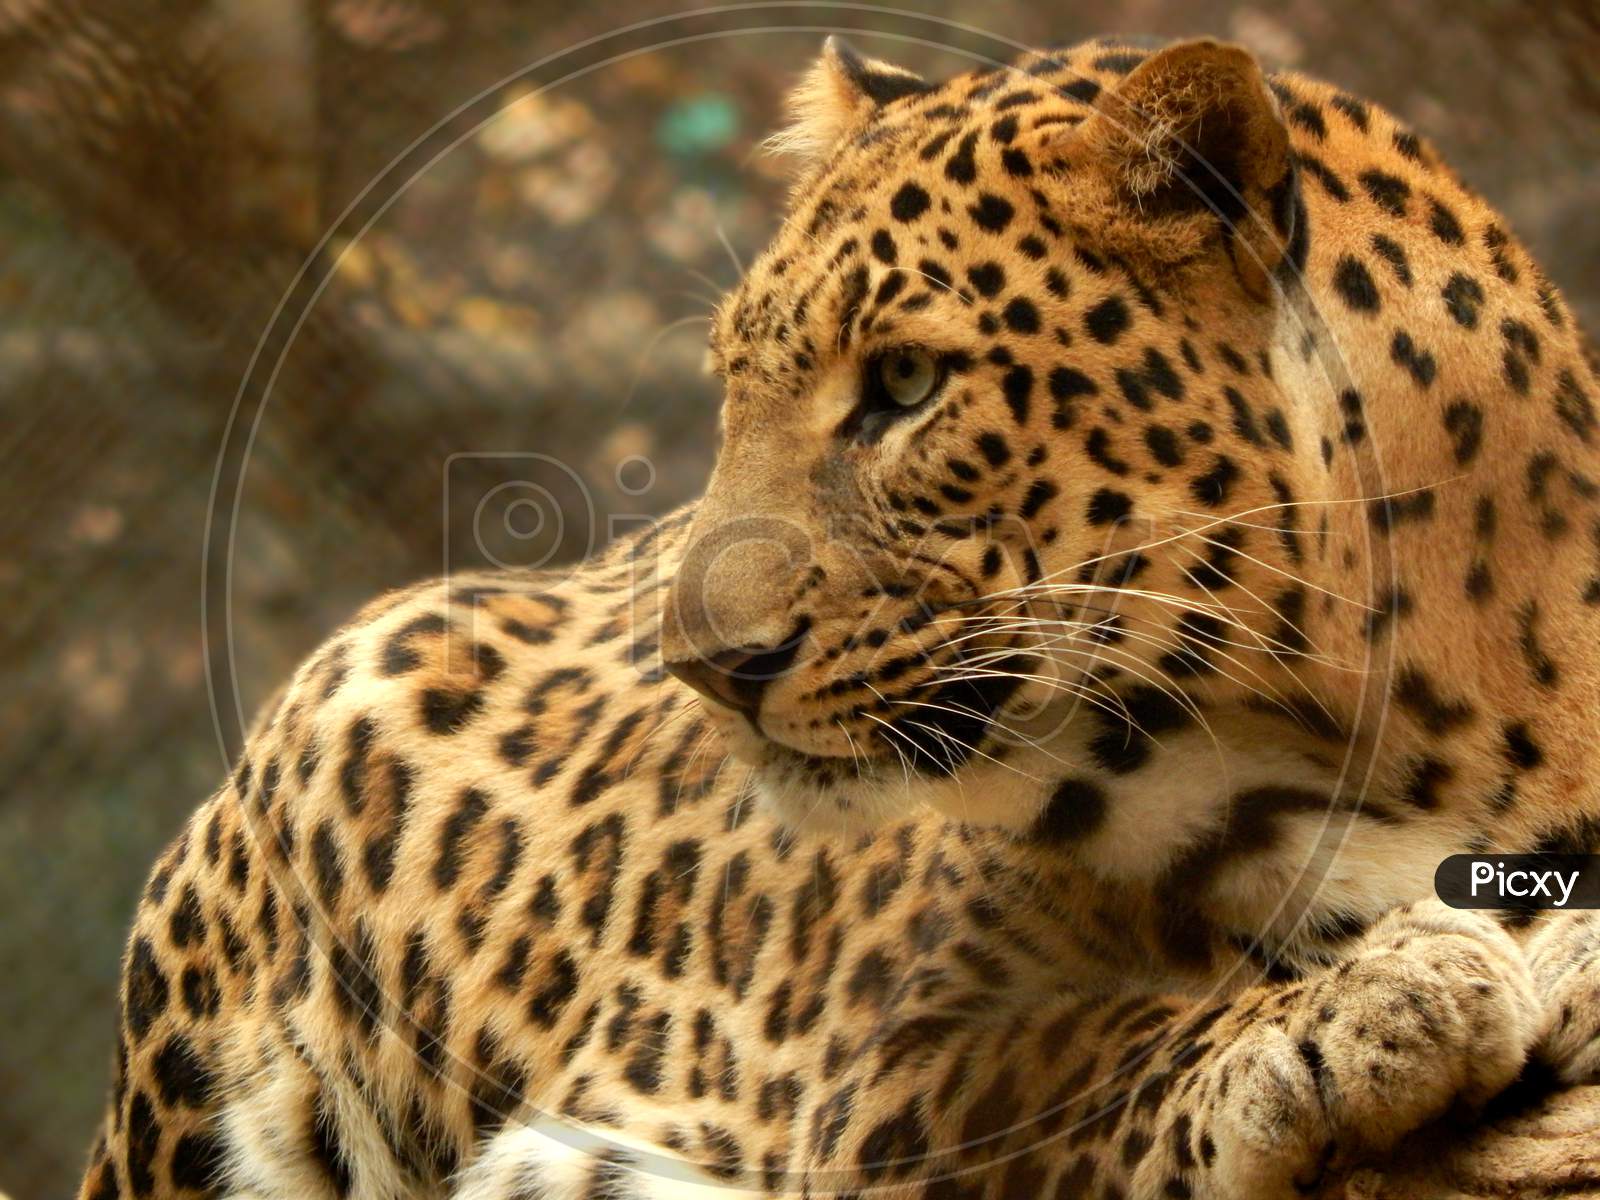 Portrait Of Indian Leopard (Panthera Pardus) One Of The Extant Species In The Genus Panthera Member Of The Felidae. Big Wild Spotted Cat.